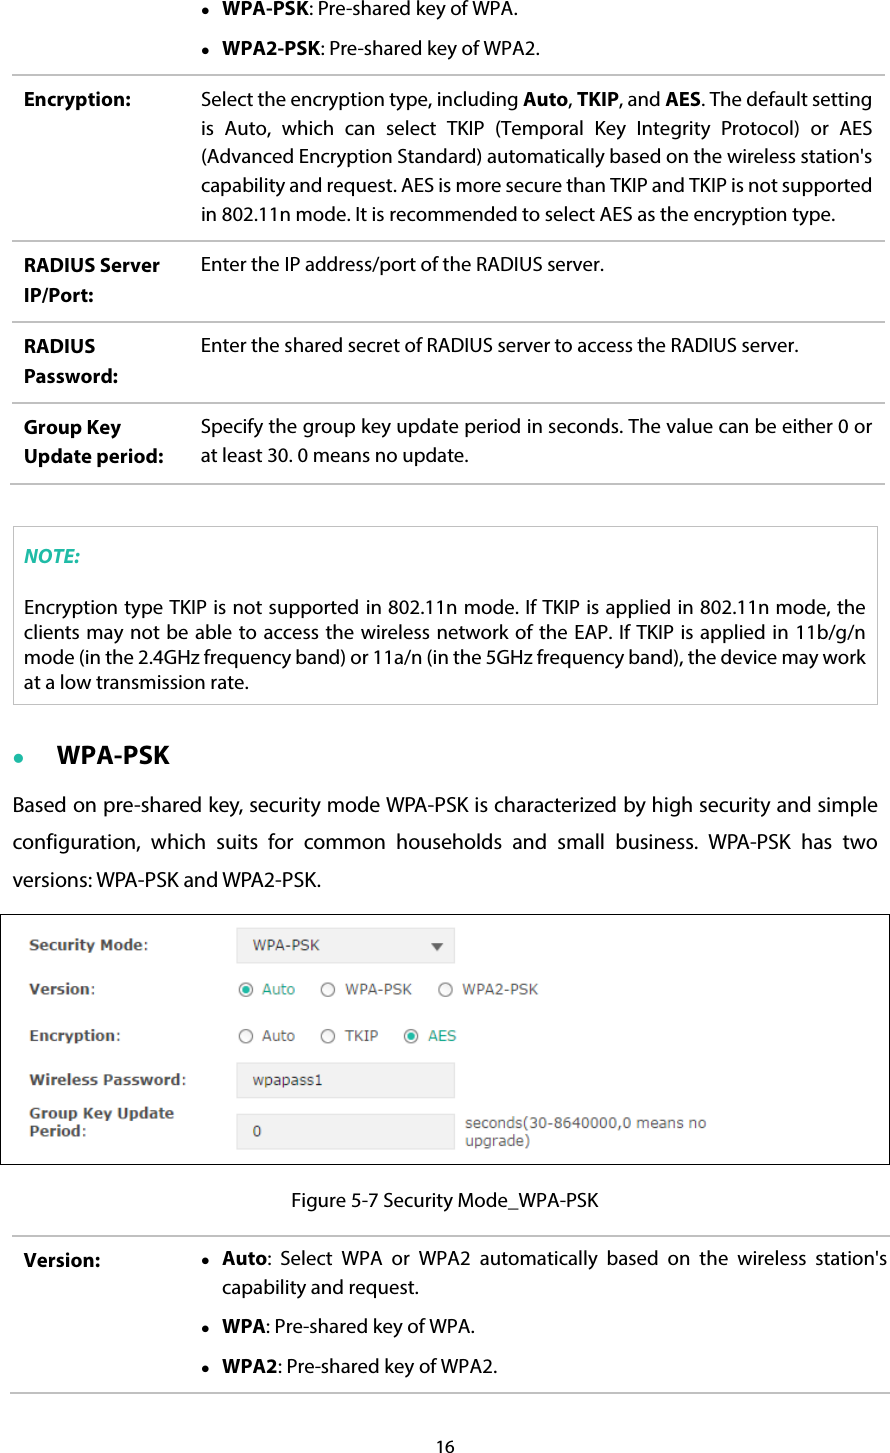 16   WPA-PSK: Pre-shared key of WPA.  WPA2-PSK: Pre-shared key of WPA2. Encryption:  Select the encryption type, including Auto, TKIP, and AES. The default setting is Auto, which can select TKIP (Temporal Key Integrity Protocol) or AES (Advanced Encryption Standard) automatically based on the wireless station&apos;s capability and request. AES is more secure than TKIP and TKIP is not supported in 802.11n mode. It is recommended to select AES as the encryption type. RADIUS Server IP/Port: Enter the IP address/port of the RADIUS server. RADIUS Password: Enter the shared secret of RADIUS server to access the RADIUS server. Group Key Update period: Specify the group key update period in seconds. The value can be either 0 or at least 30. 0 means no update.  NOTE: Encryption type TKIP is not supported in 802.11n mode. If TKIP is applied in 802.11n mode, the clients may not be able to access the wireless network of the EAP. If TKIP is applied in 11b/g/n mode (in the 2.4GHz frequency band) or 11a/n (in the 5GHz frequency band), the device may work at a low transmission rate.  WPA-PSK Based on pre-shared key, security mode WPA-PSK is characterized by high security and simple configuration, which suits for common households and small business. WPA-PSK has two versions: WPA-PSK and WPA2-PSK.  Figure 5-7 Security Mode_WPA-PSK Version:   Auto:  Select WPA or WPA2 automatically based on the wireless station&apos;s capability and request.  WPA: Pre-shared key of WPA.  WPA2: Pre-shared key of WPA2. 